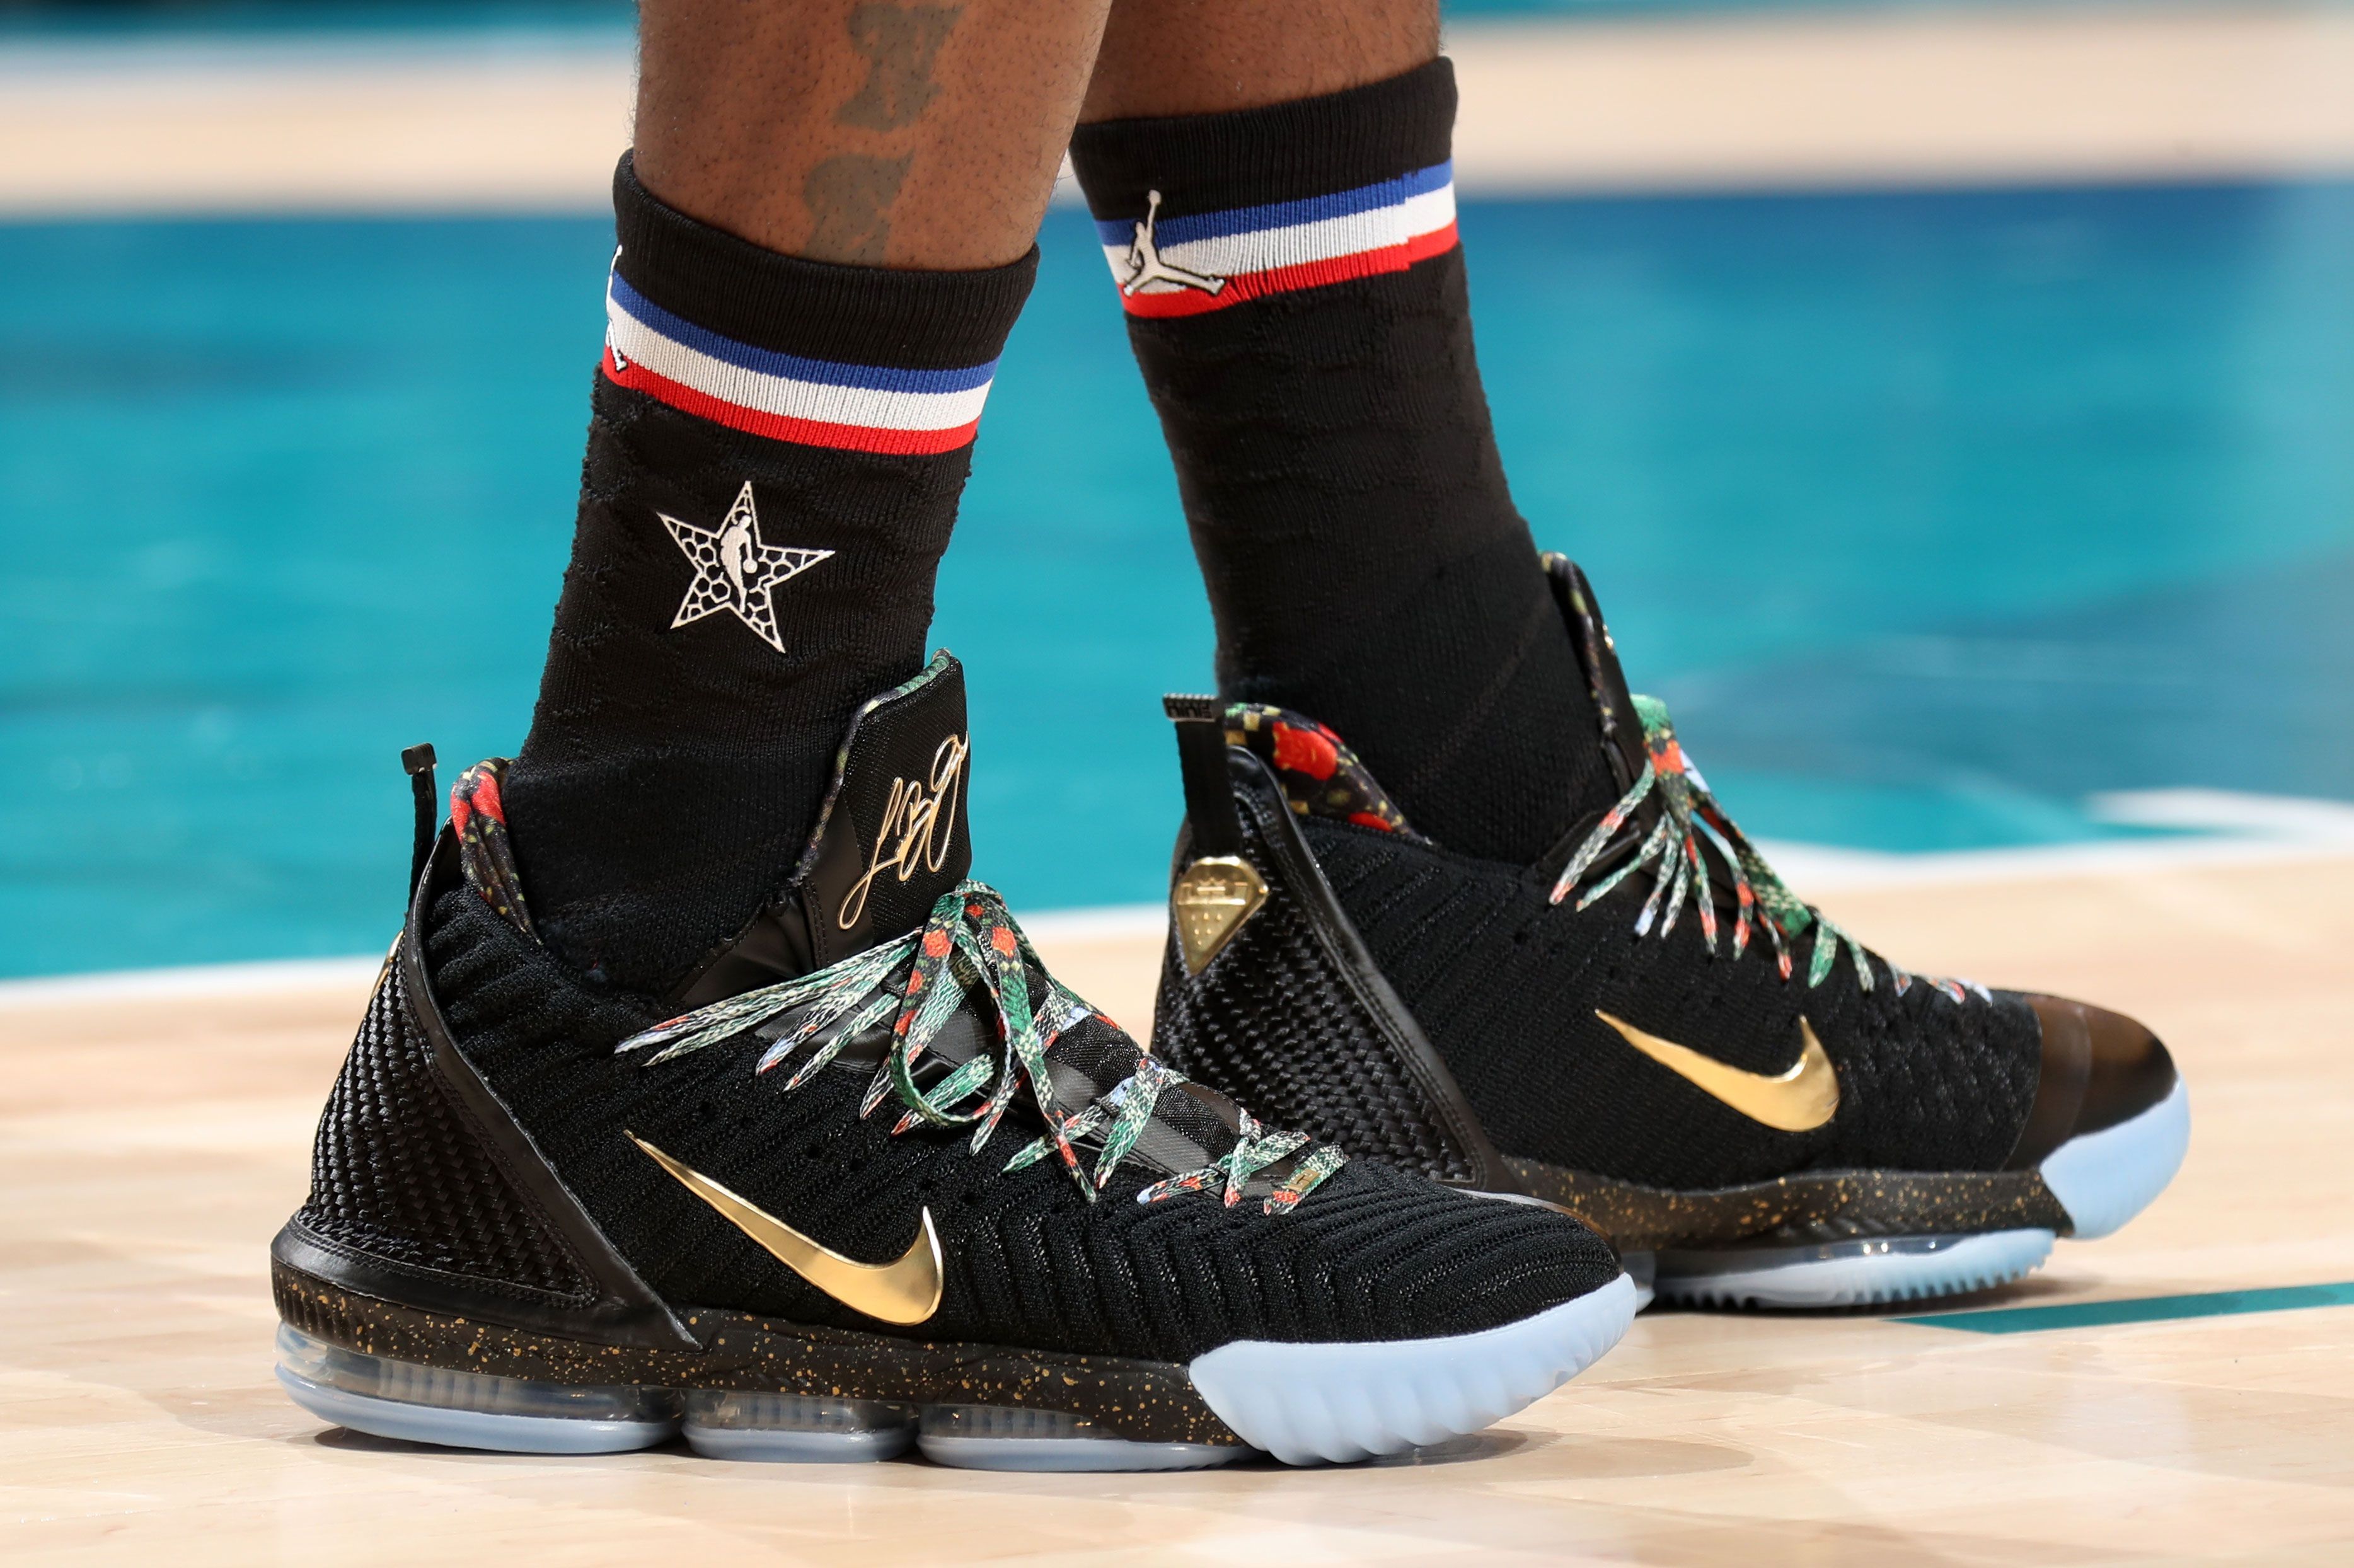 Which Player Had The Best Sneakers On All-Star Weekend? - Espn